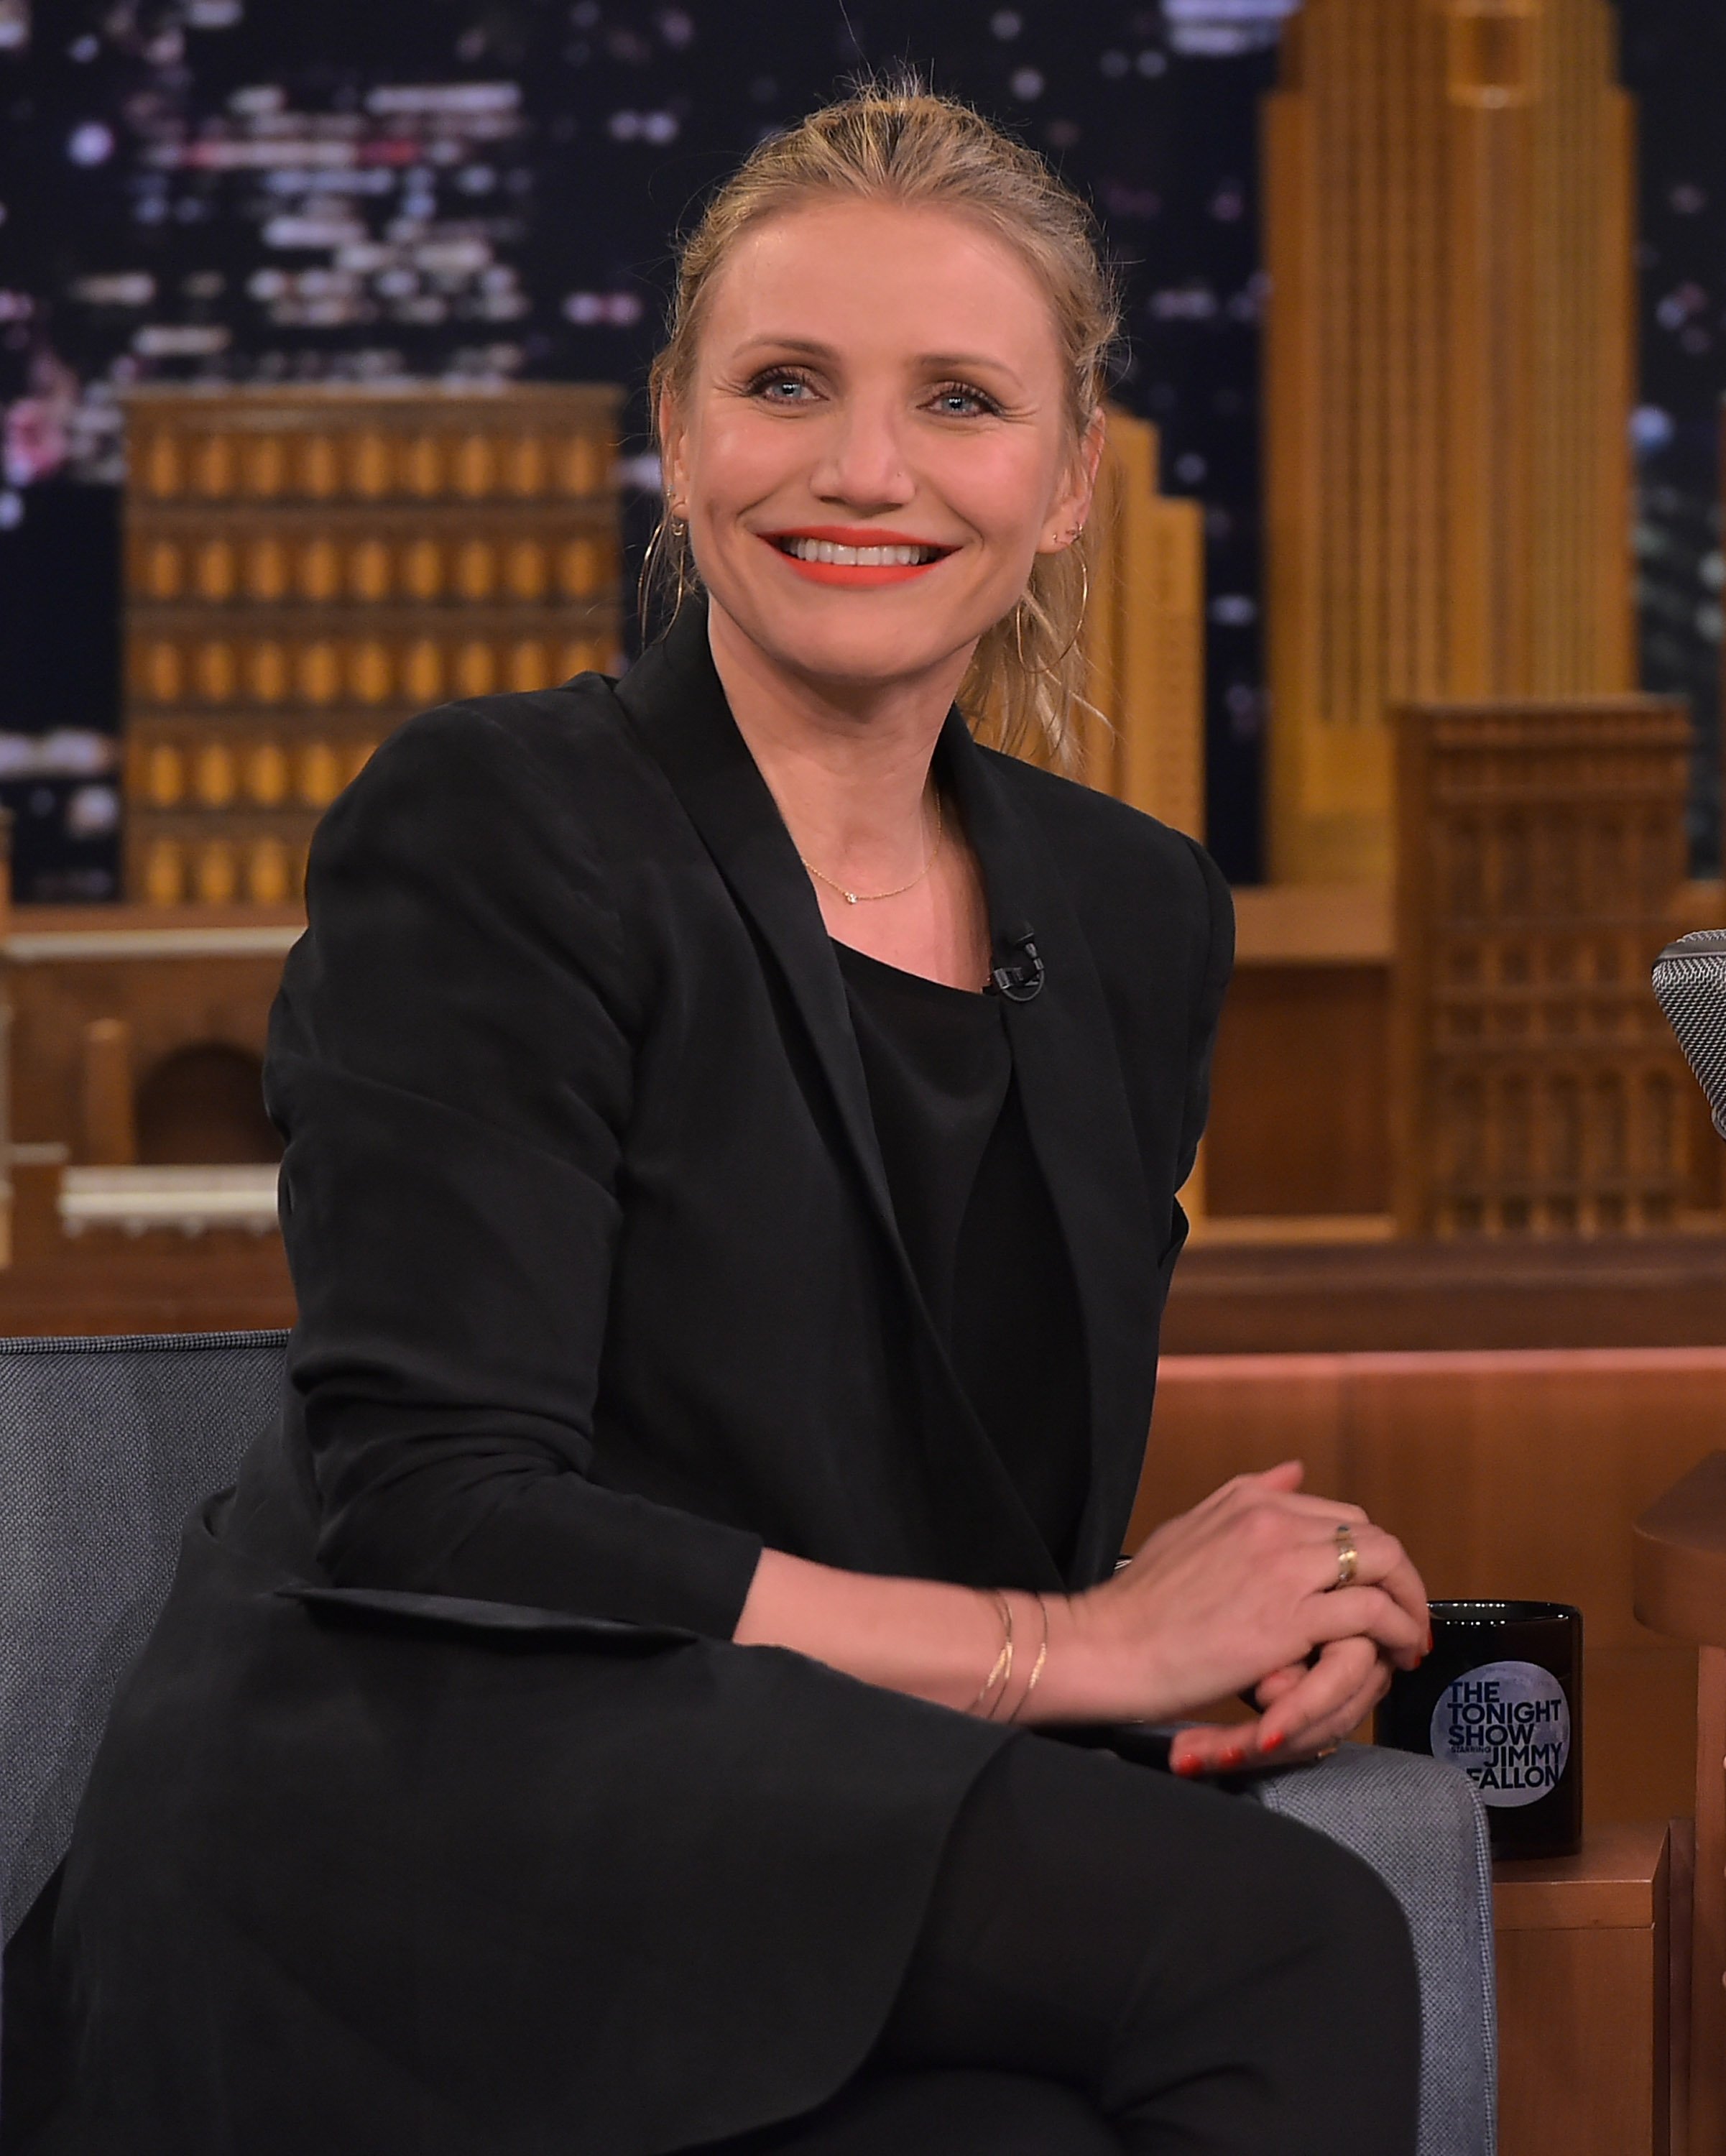 Cameron Diaz at "The Tonight Show Starring Jimmy Fallon" on April 6, 2016 | Source: Getty Images